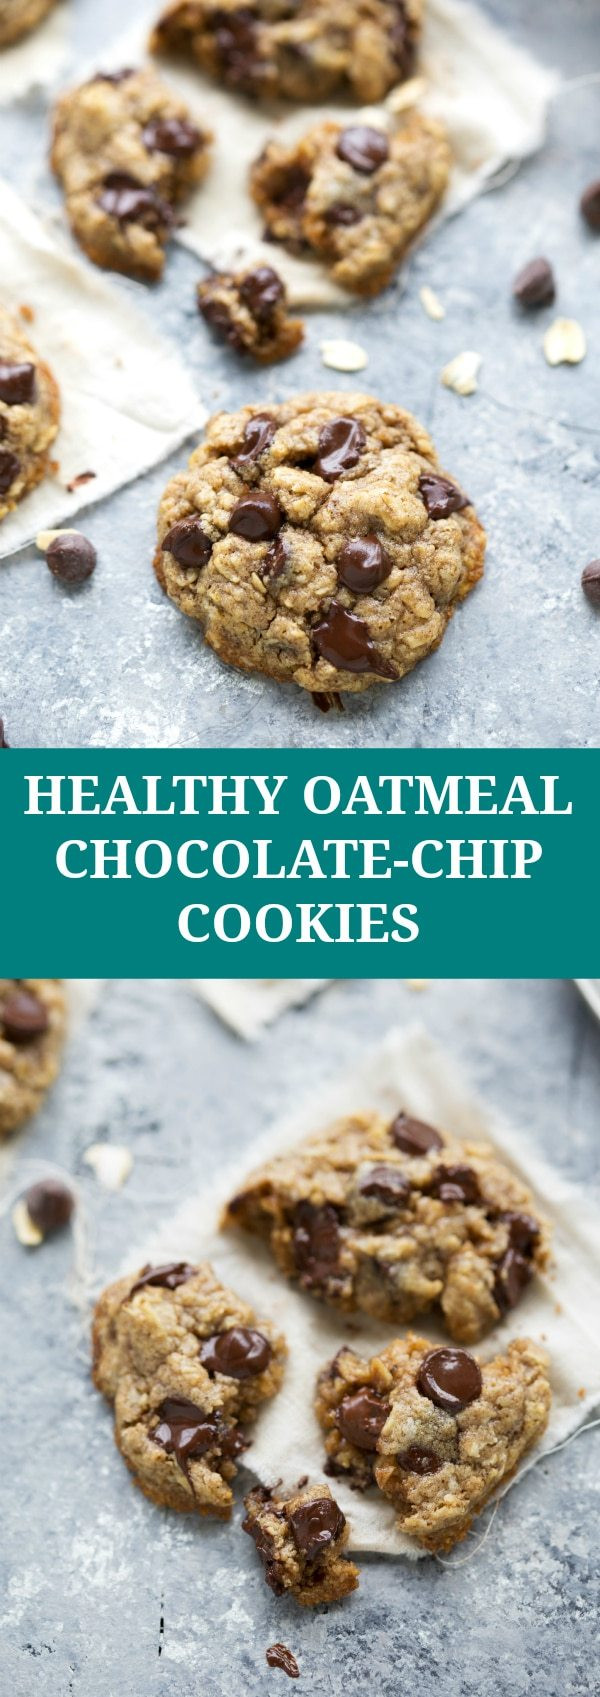 Healthy Chocolate Oatmeal Cookies
 The BEST healthy oatmeal chocolate chip cookies Chelsea